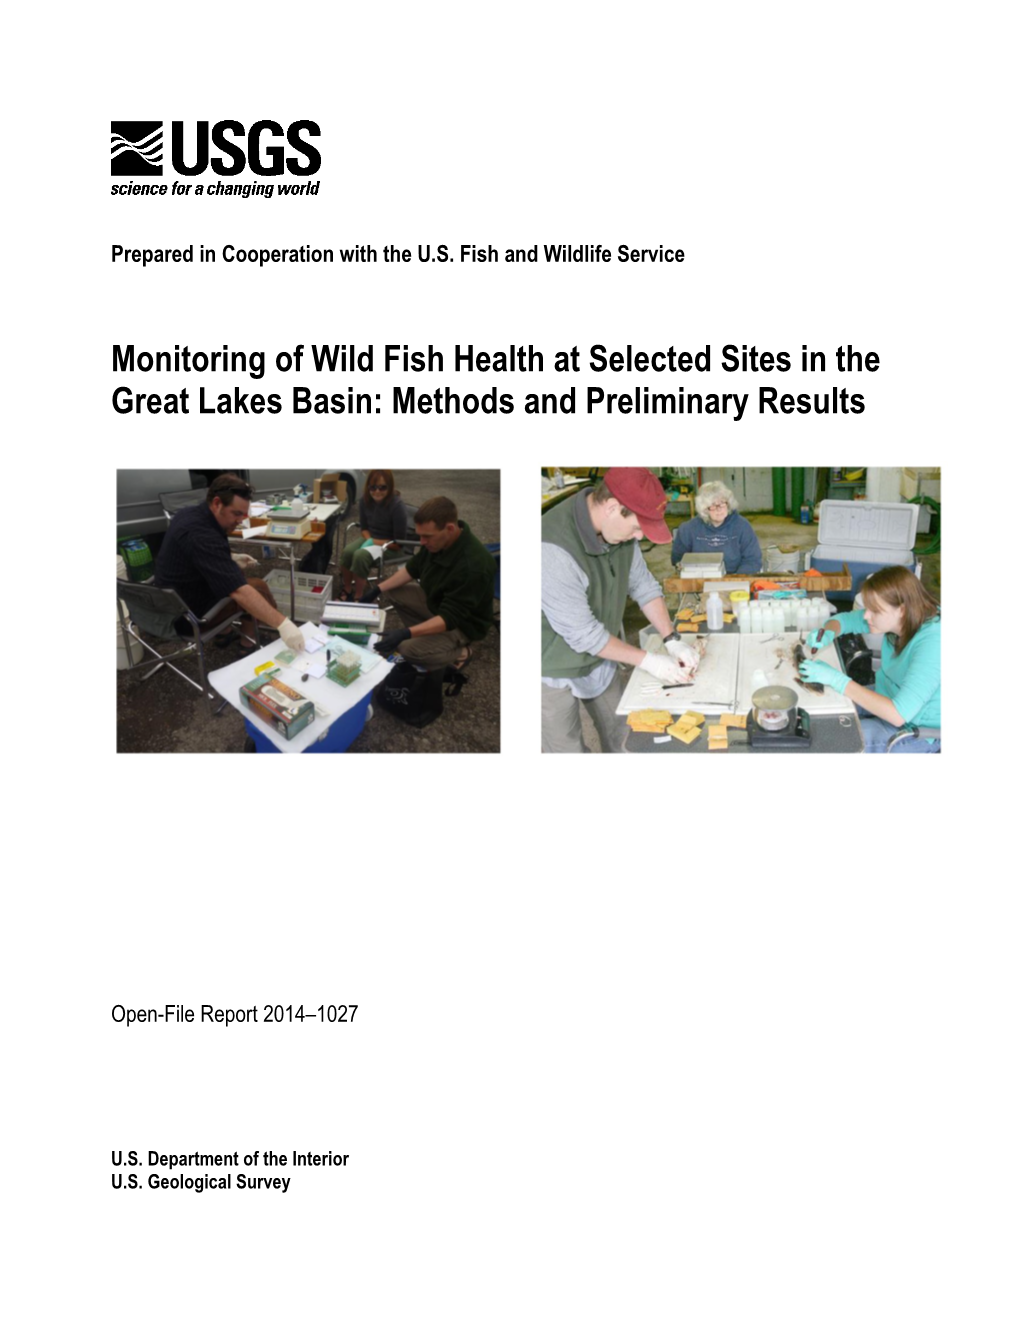 Monitoring of Wild Fish Health at Selected Sites in the Great Lakes Basin: Methods and Preliminary Results